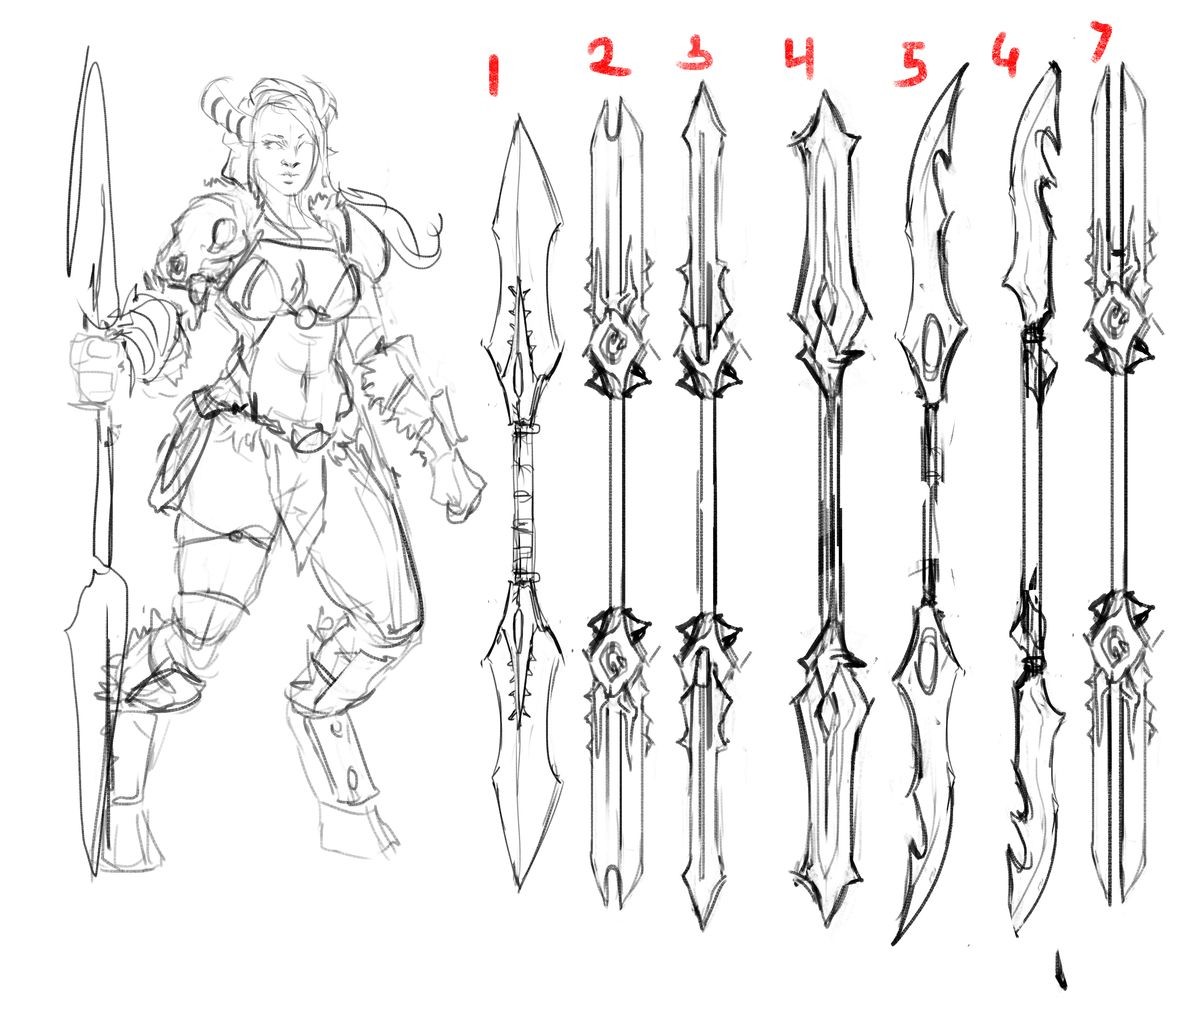 Character Design and Spear Design